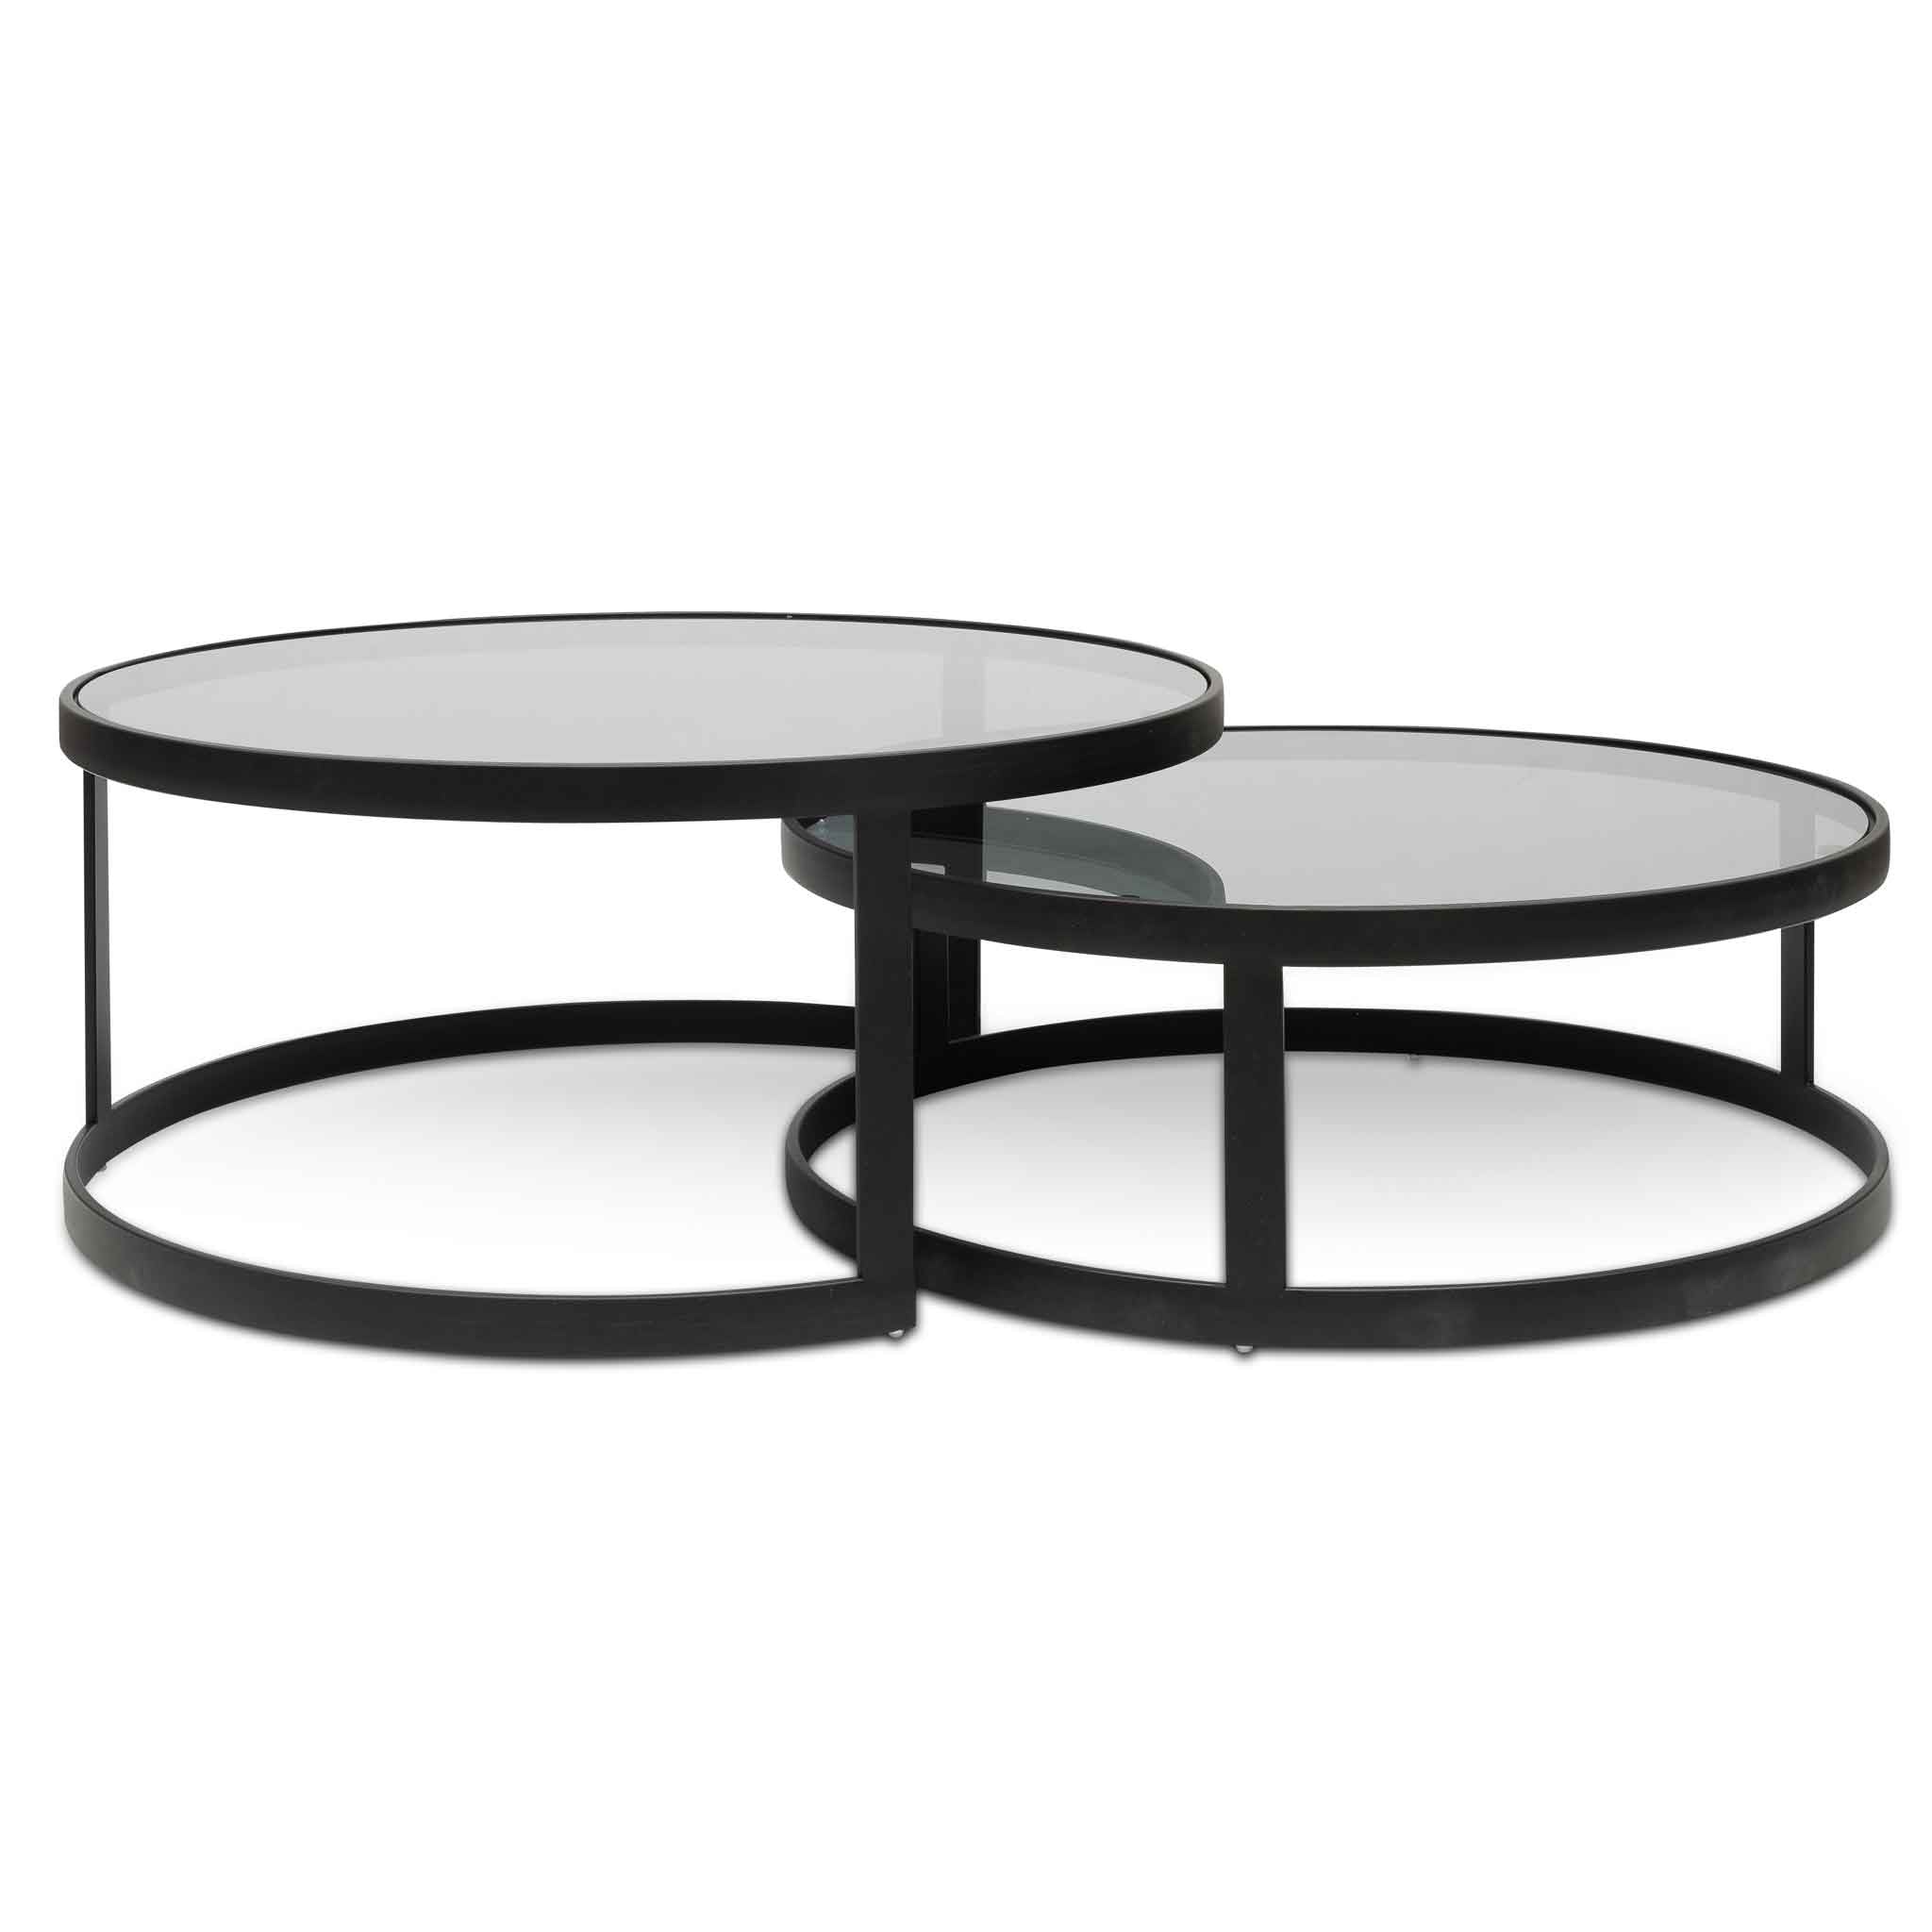 Nested Grey Glass Coffee Table - Black Base2